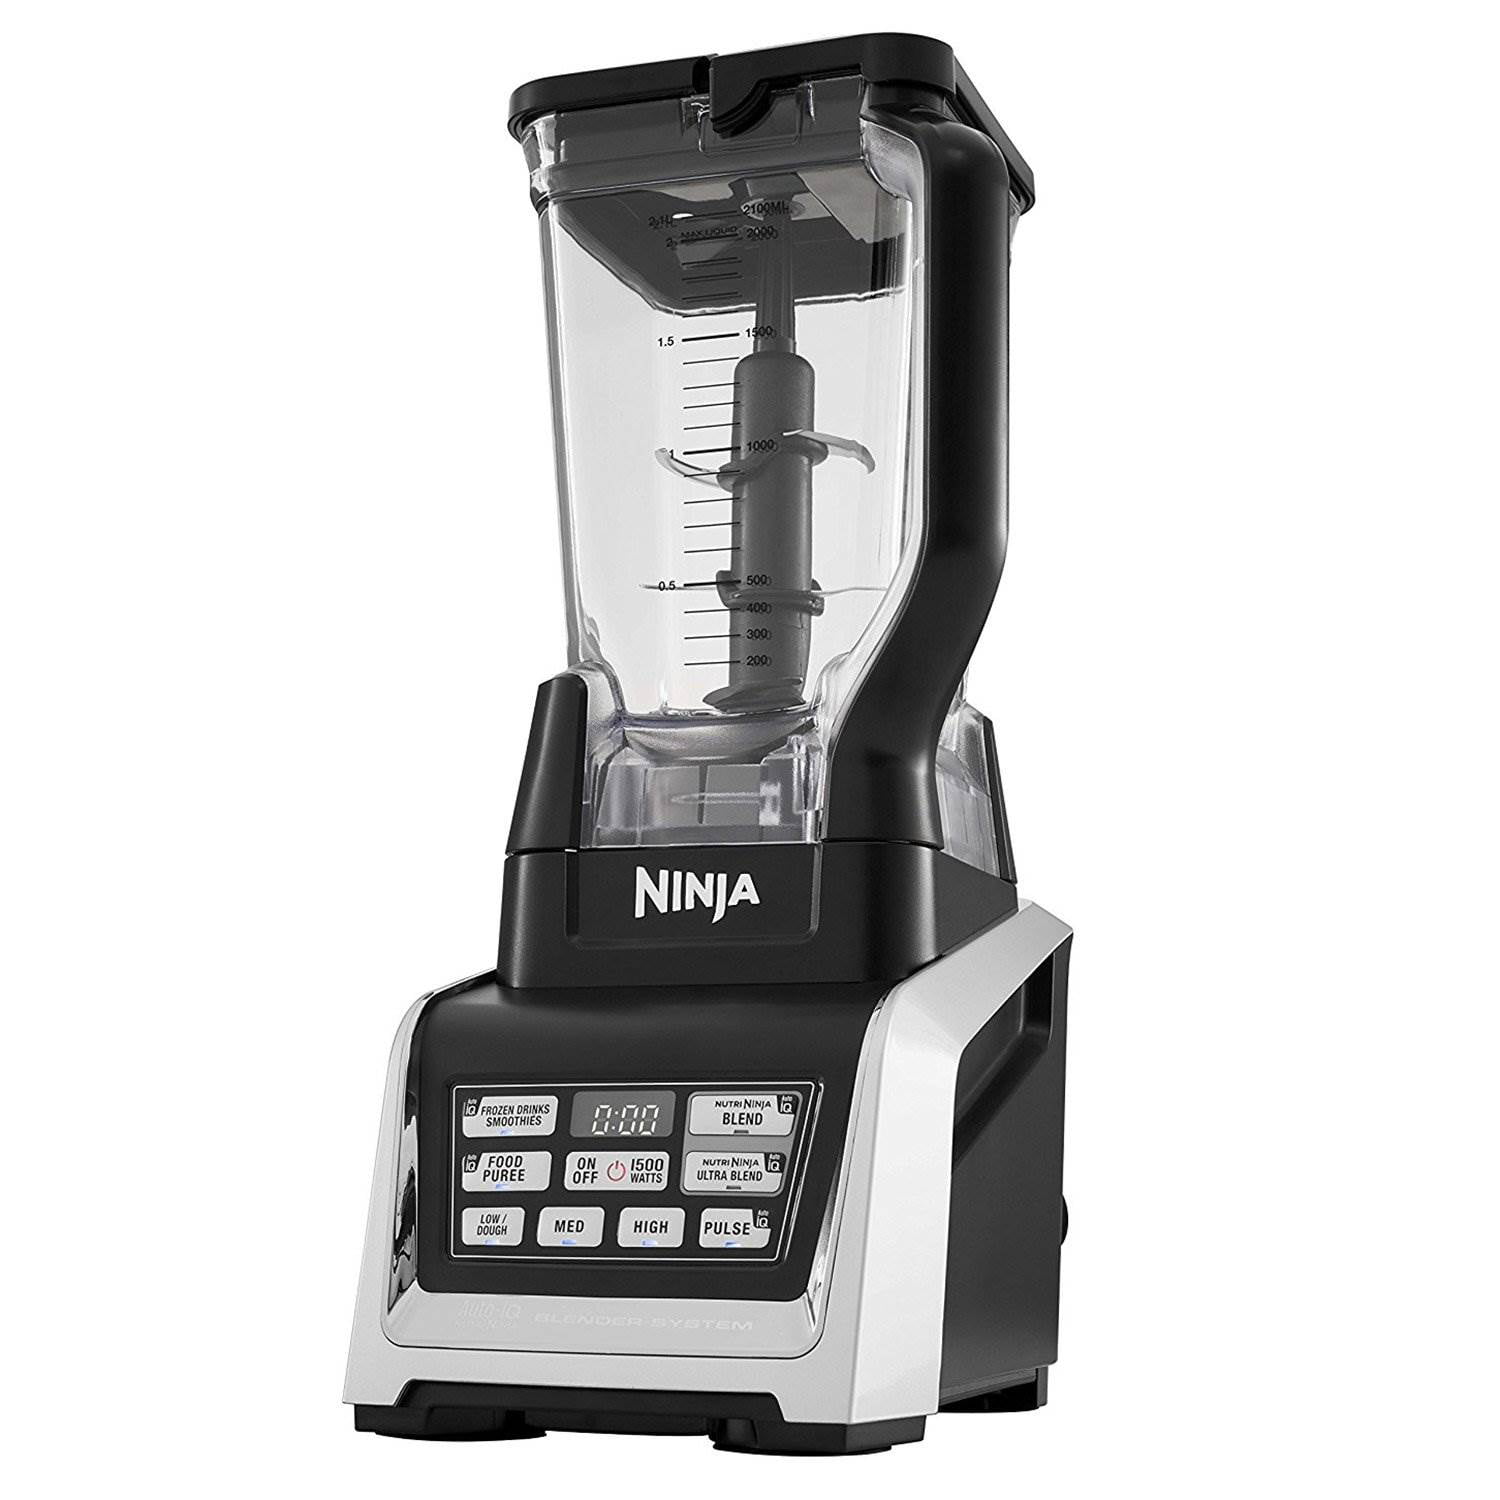 Nutri Ninja Blender Duo with Auto-iQ features timed, intelligent programs  for pulsing, blending and pausing patterns that do the work for…